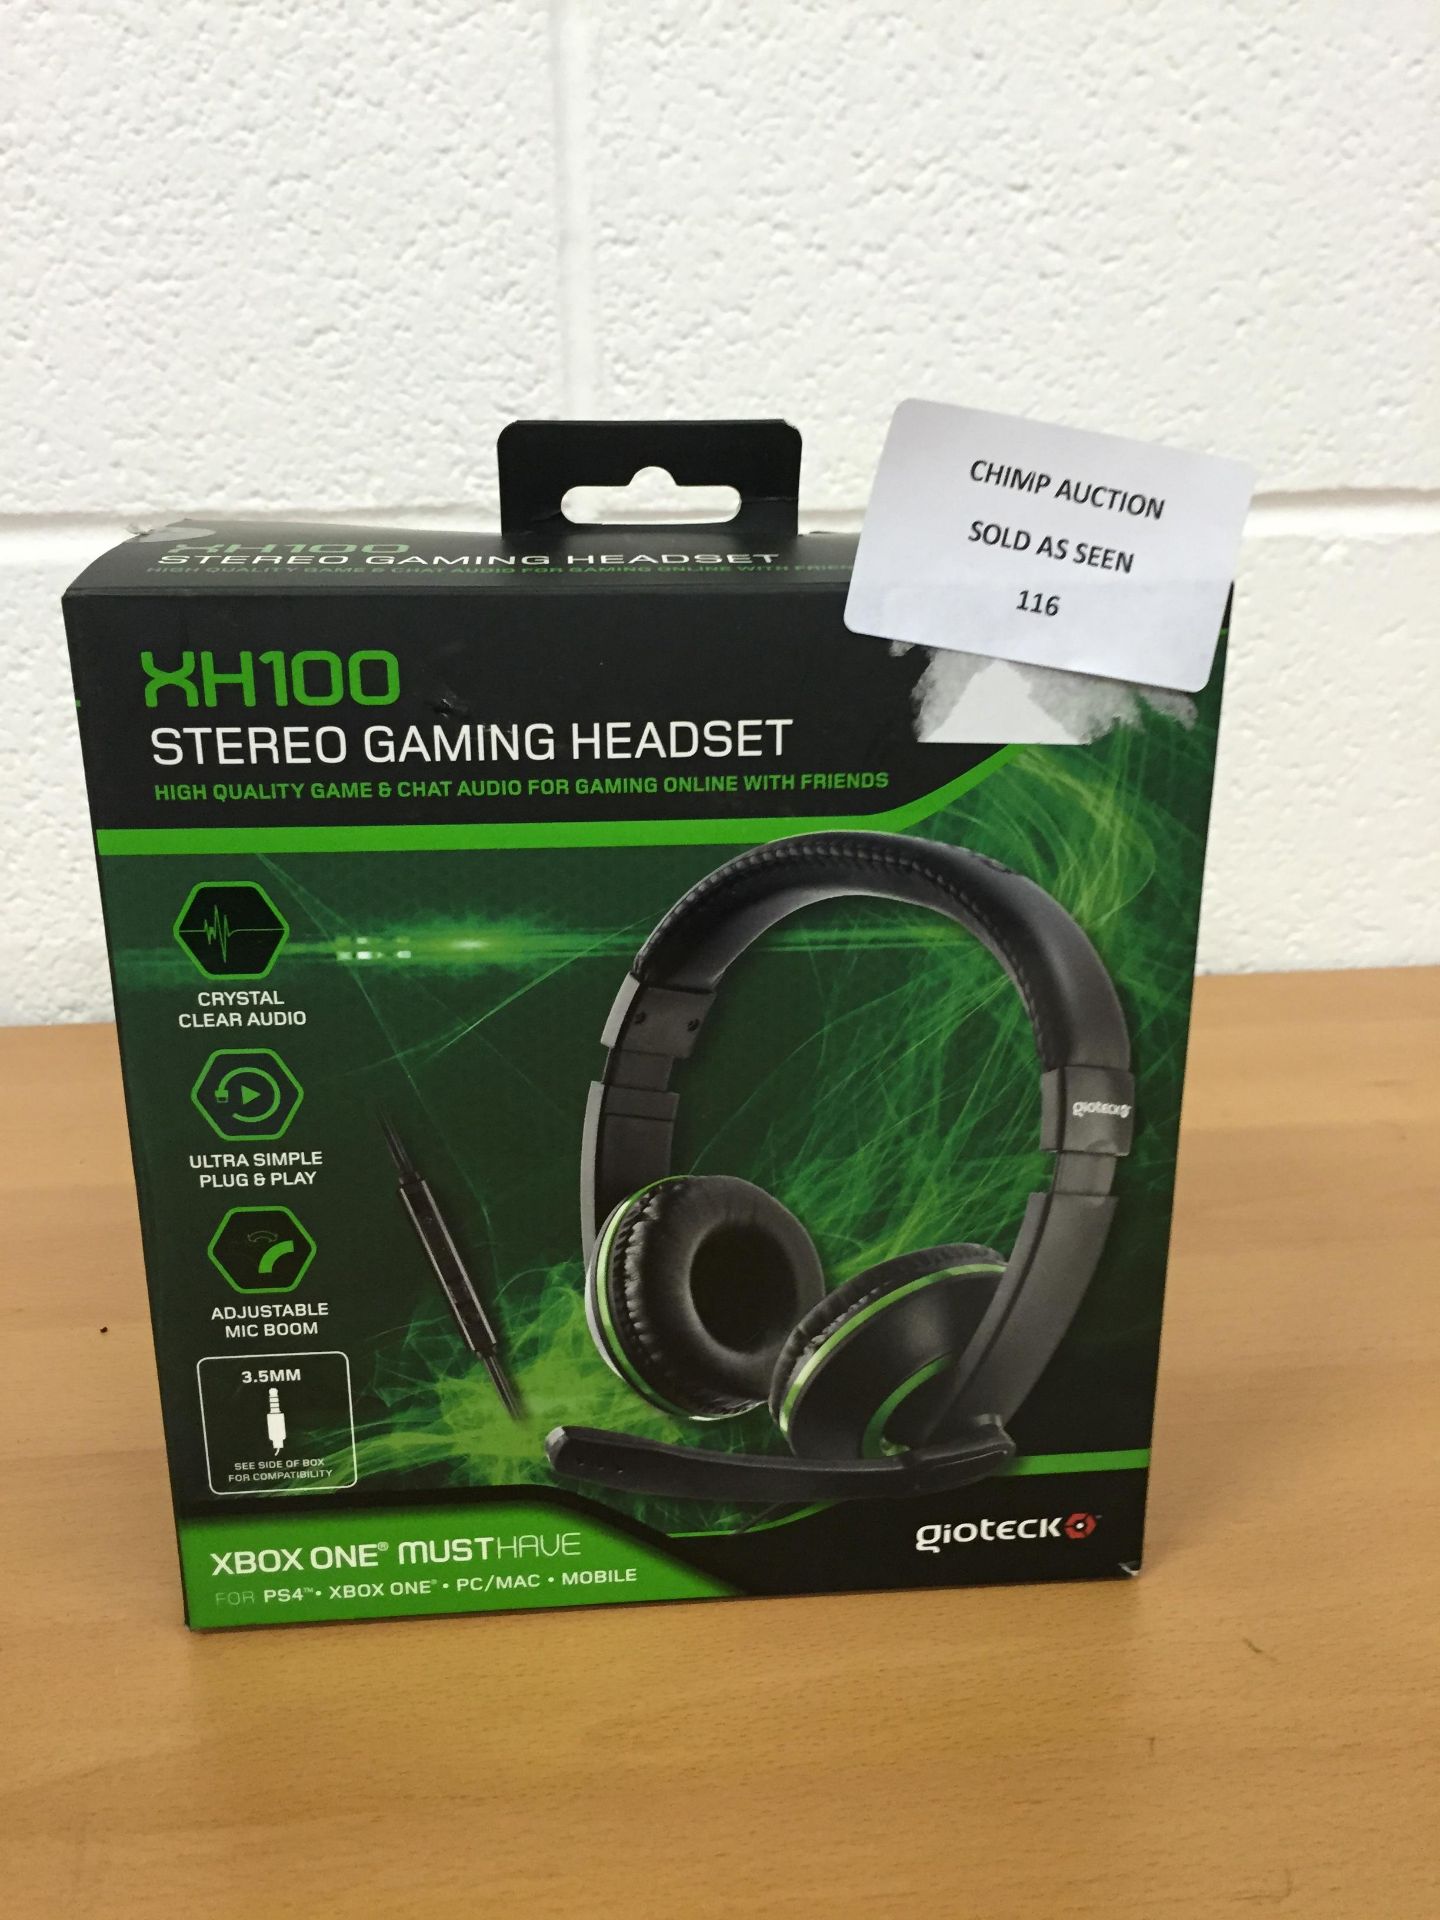 Gioteck Xh100 Gaming Headset ( Xbox One/ PS4 )